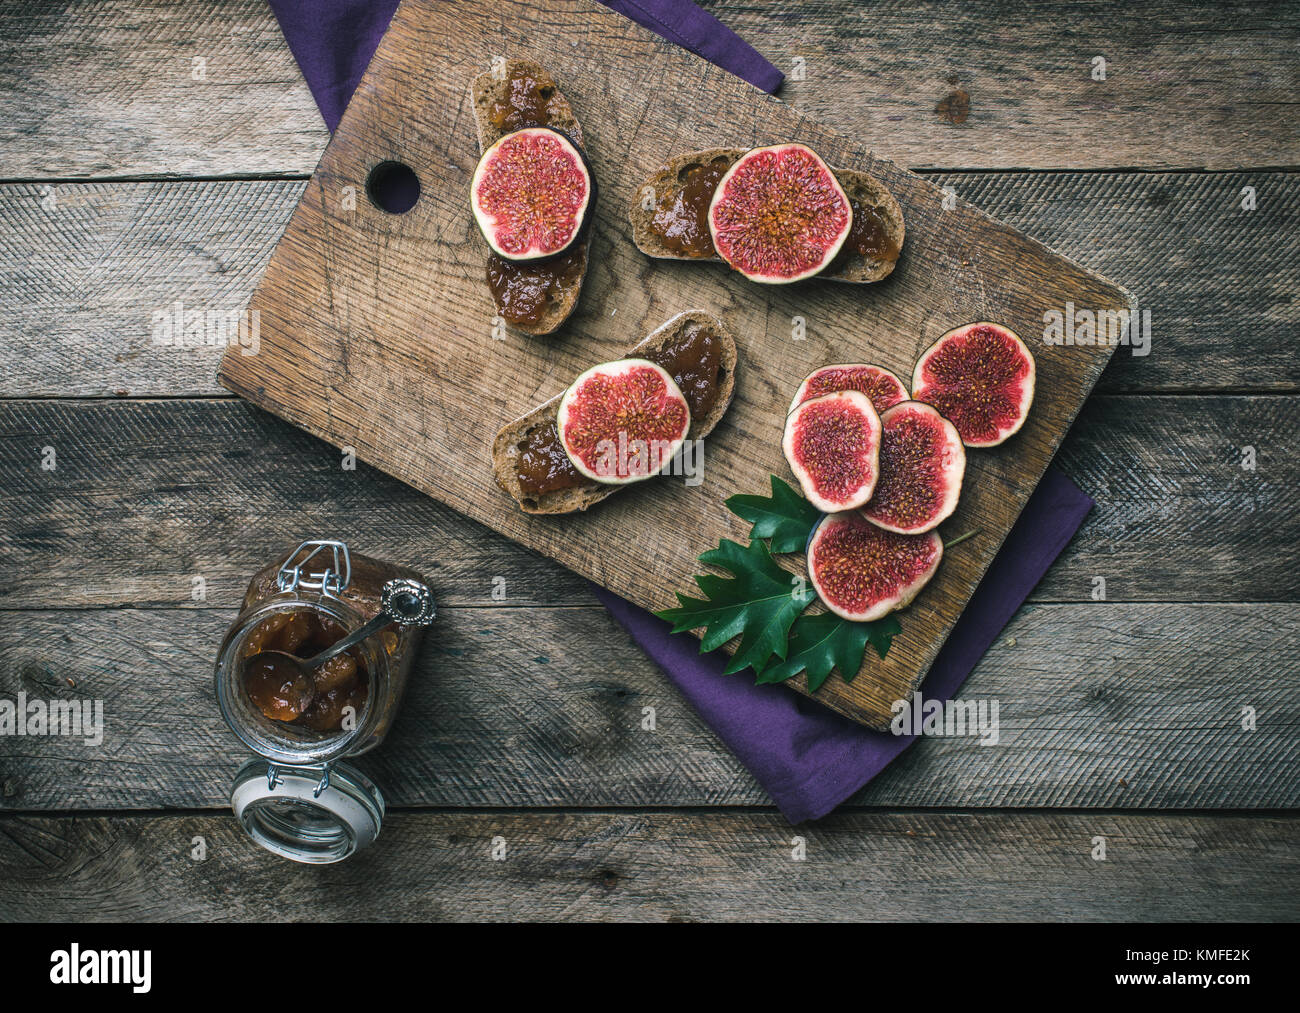 figs, nuts and bread with jam on wooden choppingboard in rustic style. Autumn season food photo Stock Photo